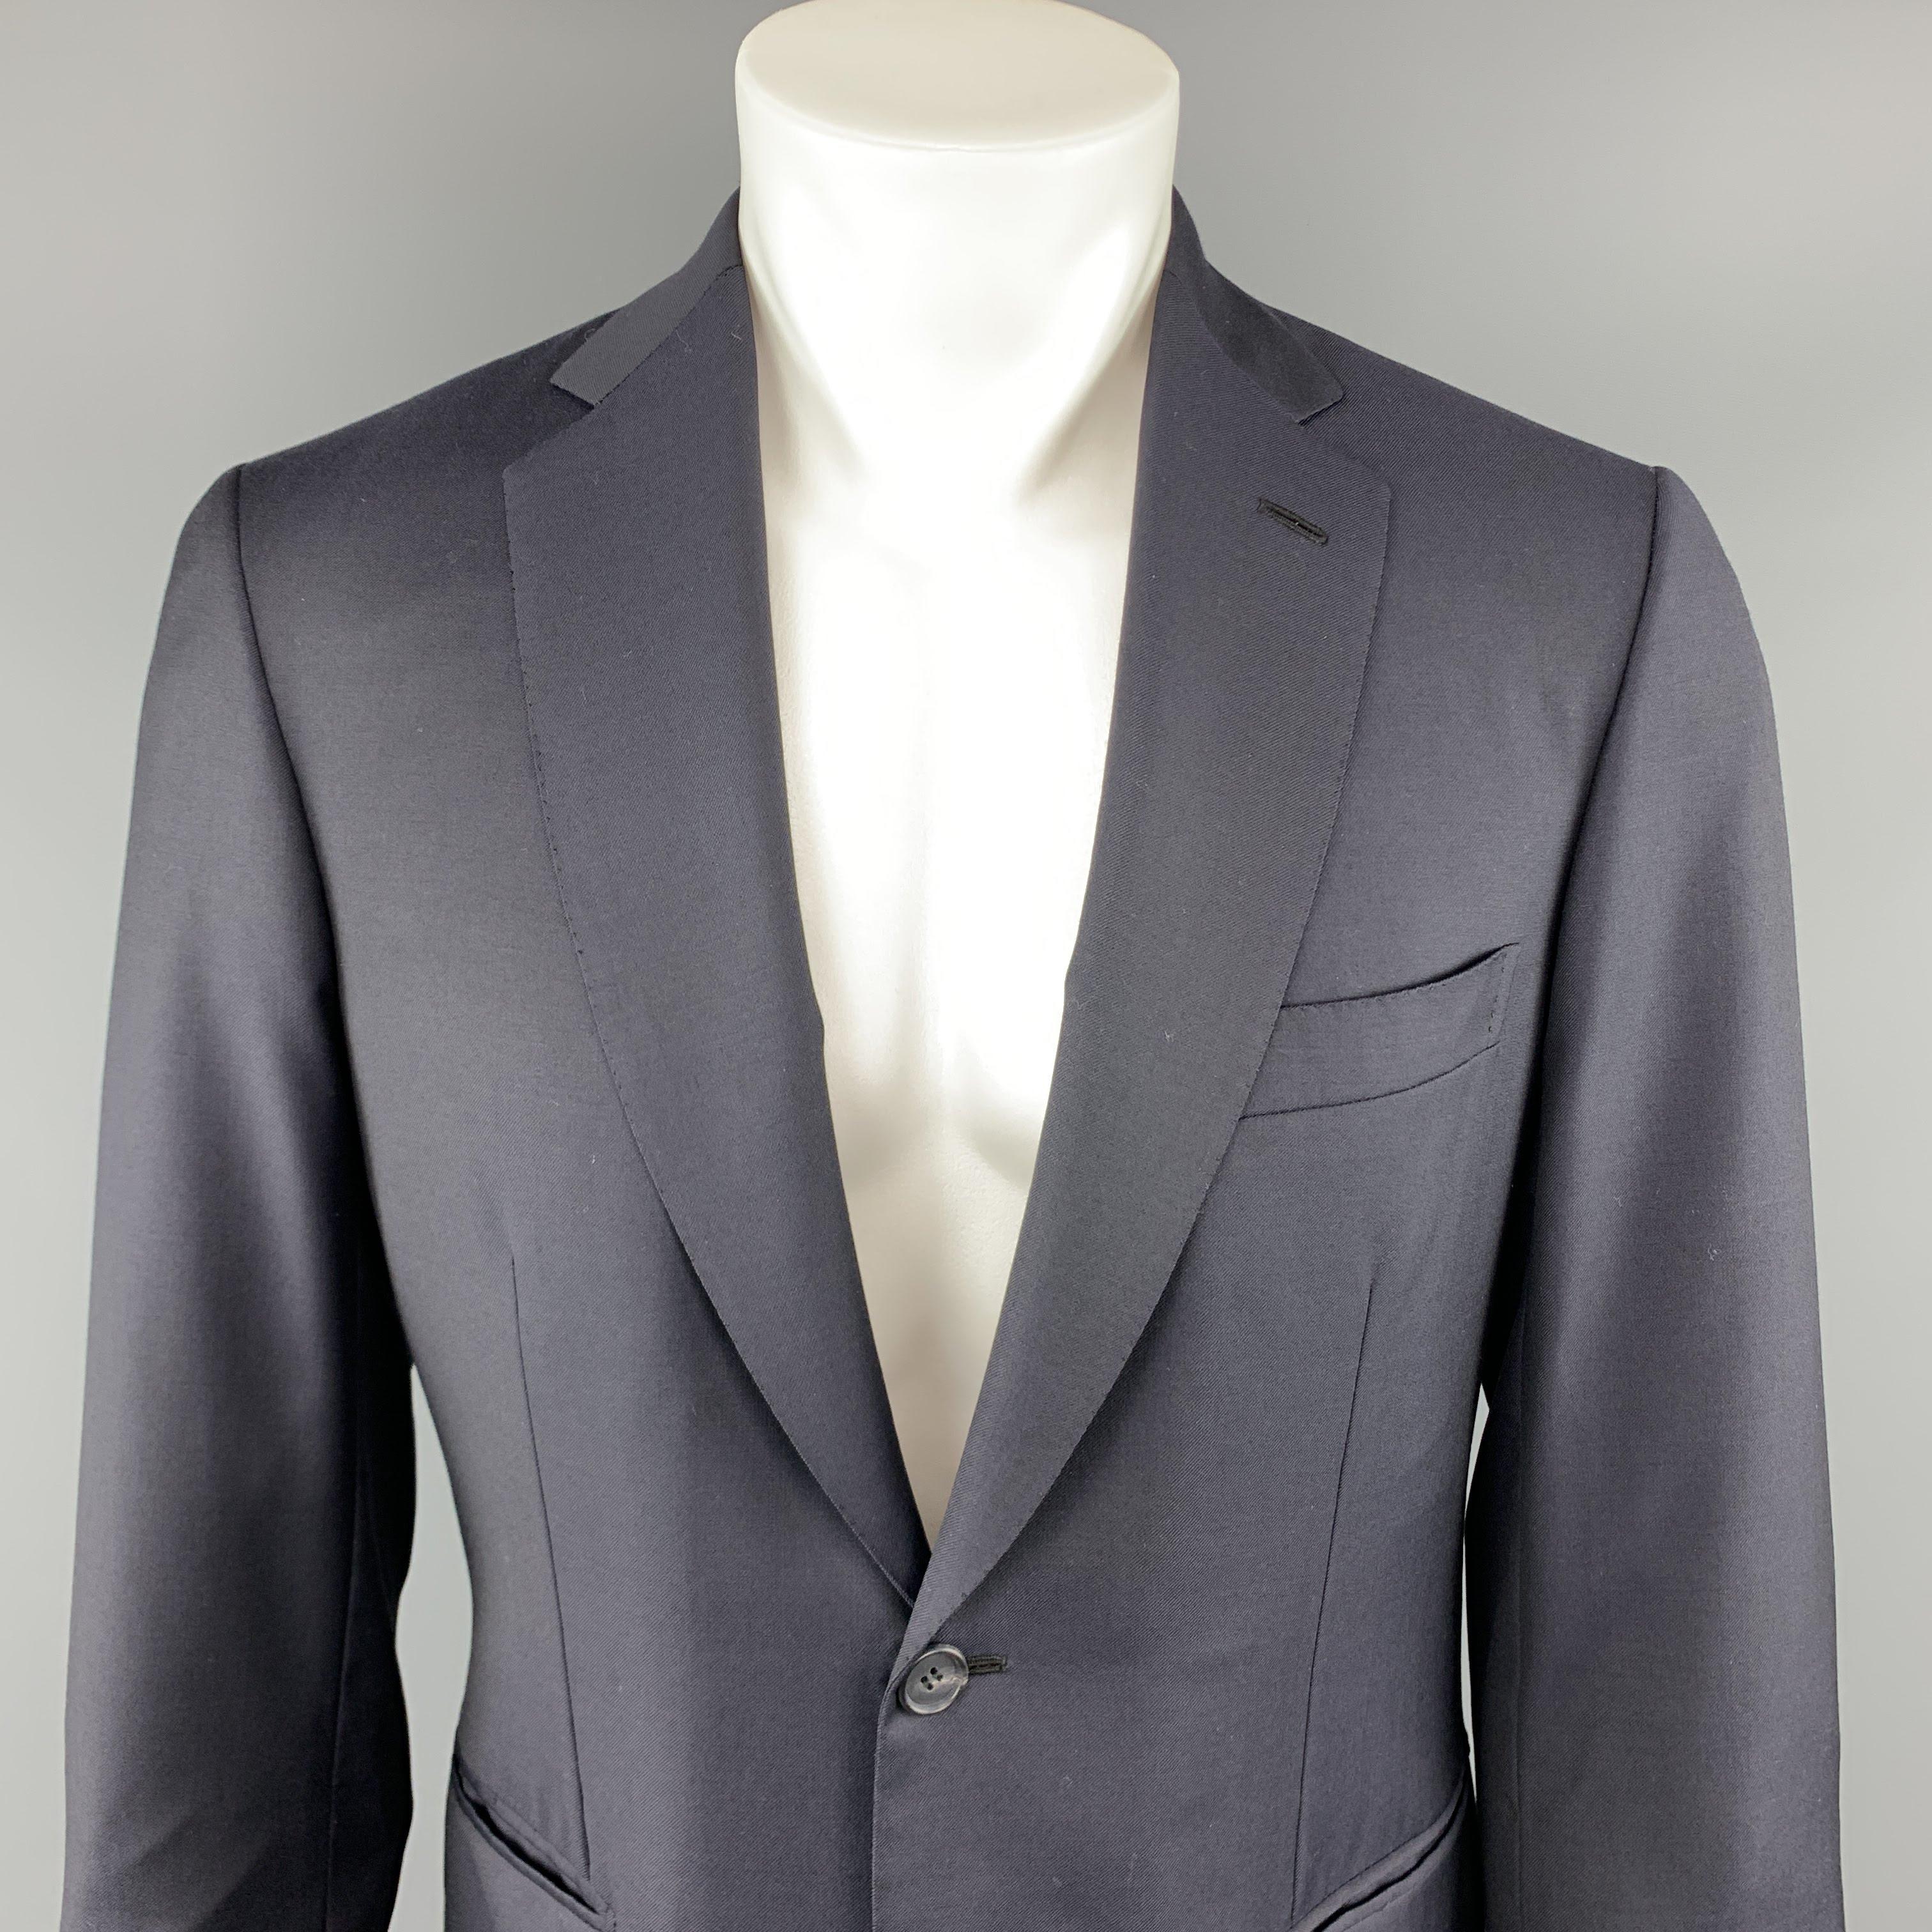 BRIONI by WILKES BASHFORD sport coat comes in a navy wool featuring a notch lapel style, flap pockets, and a two button closure.
 
Excellent Pre-Owned Condition.
Marked: (No size)
 
Measurements:
 
Shoulder: 18 in.
Chest: 38 in.
Sleeve: 23